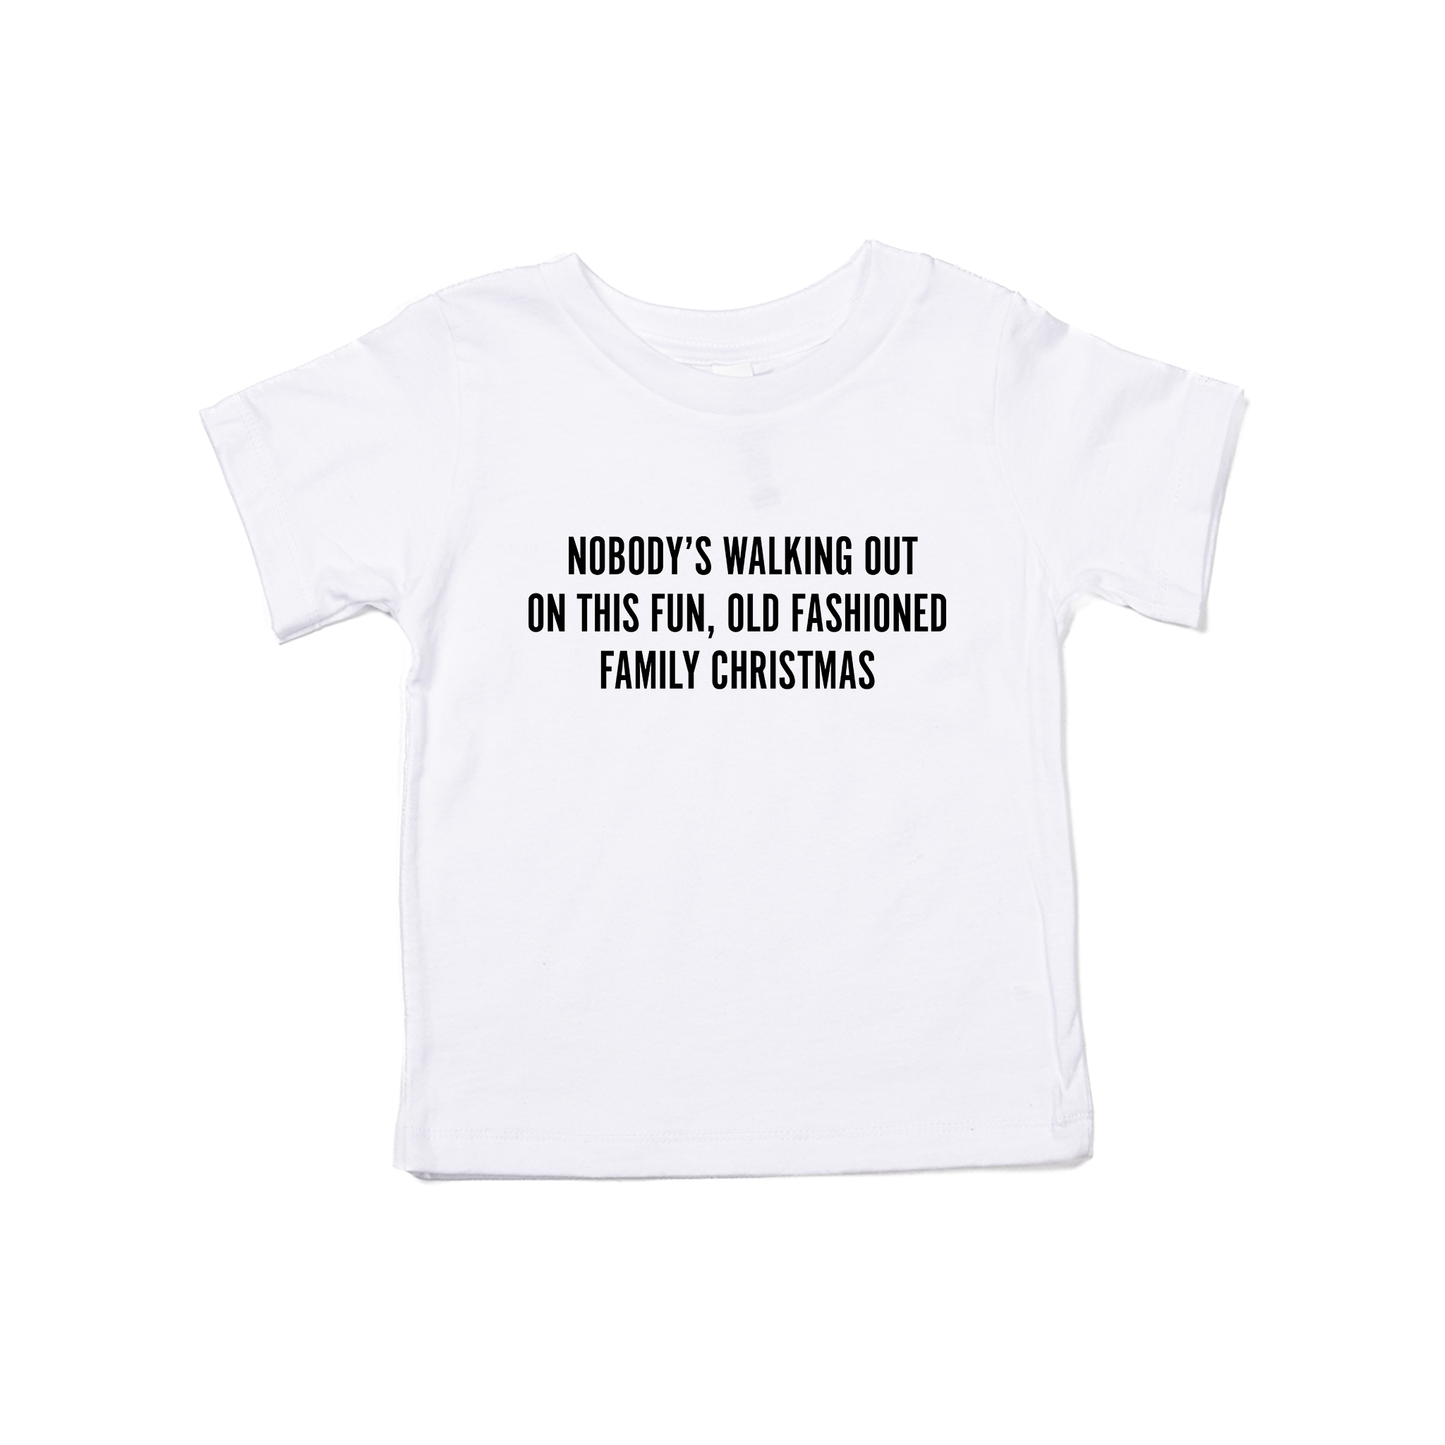 Nobody's walking out on this fun old fashioned family Christmas (Black) - Kids Tee (White)